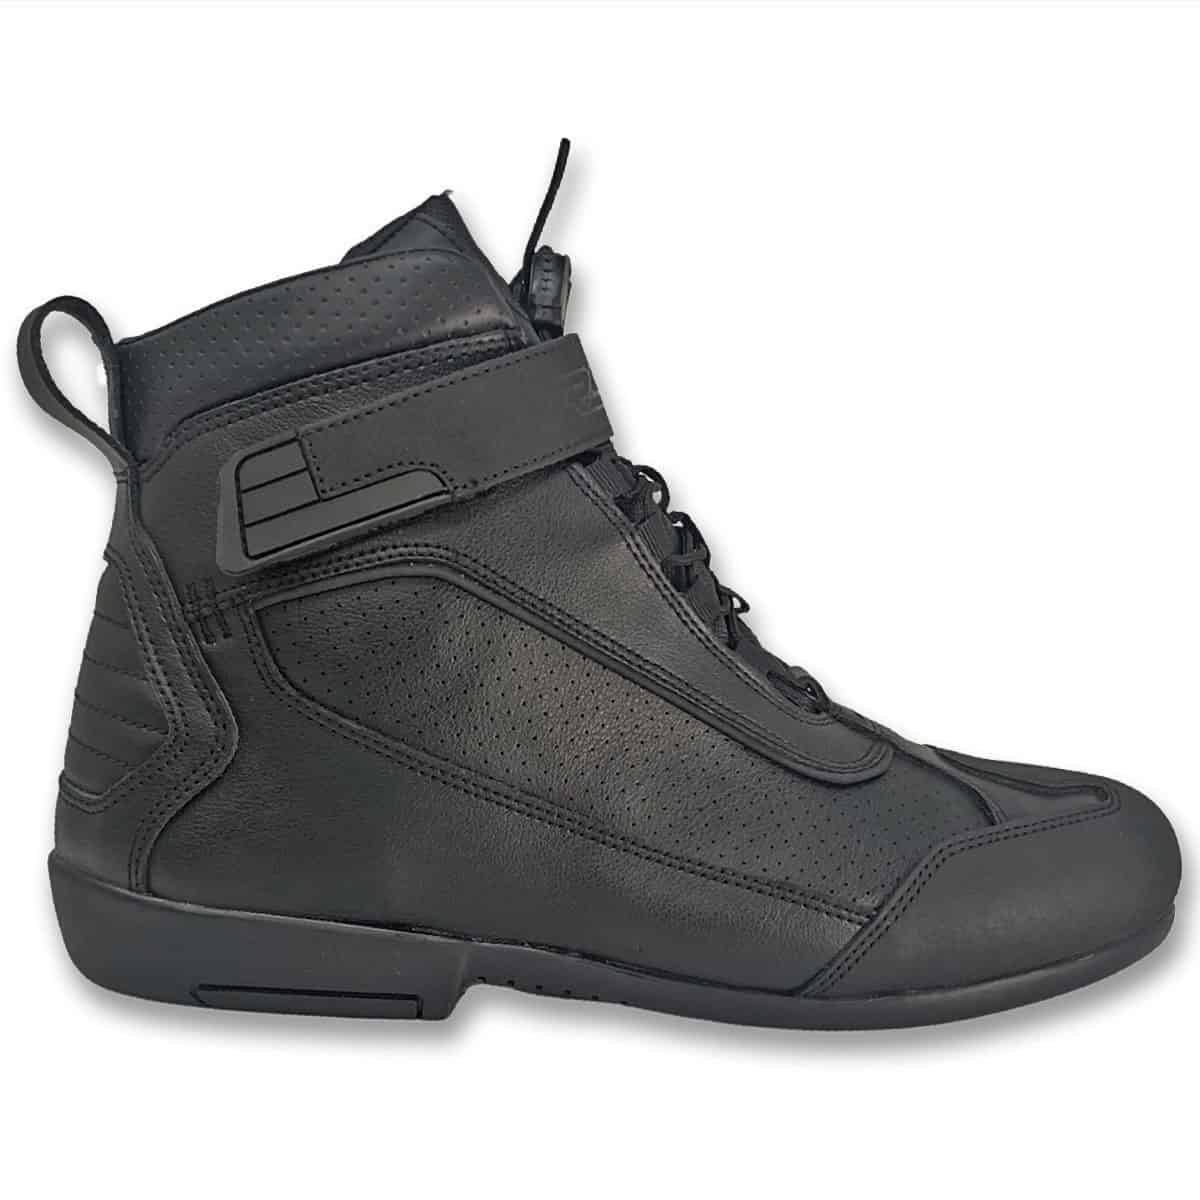 RST Stunt-X CE WP Boots: Short waterproof boot with impact protection side